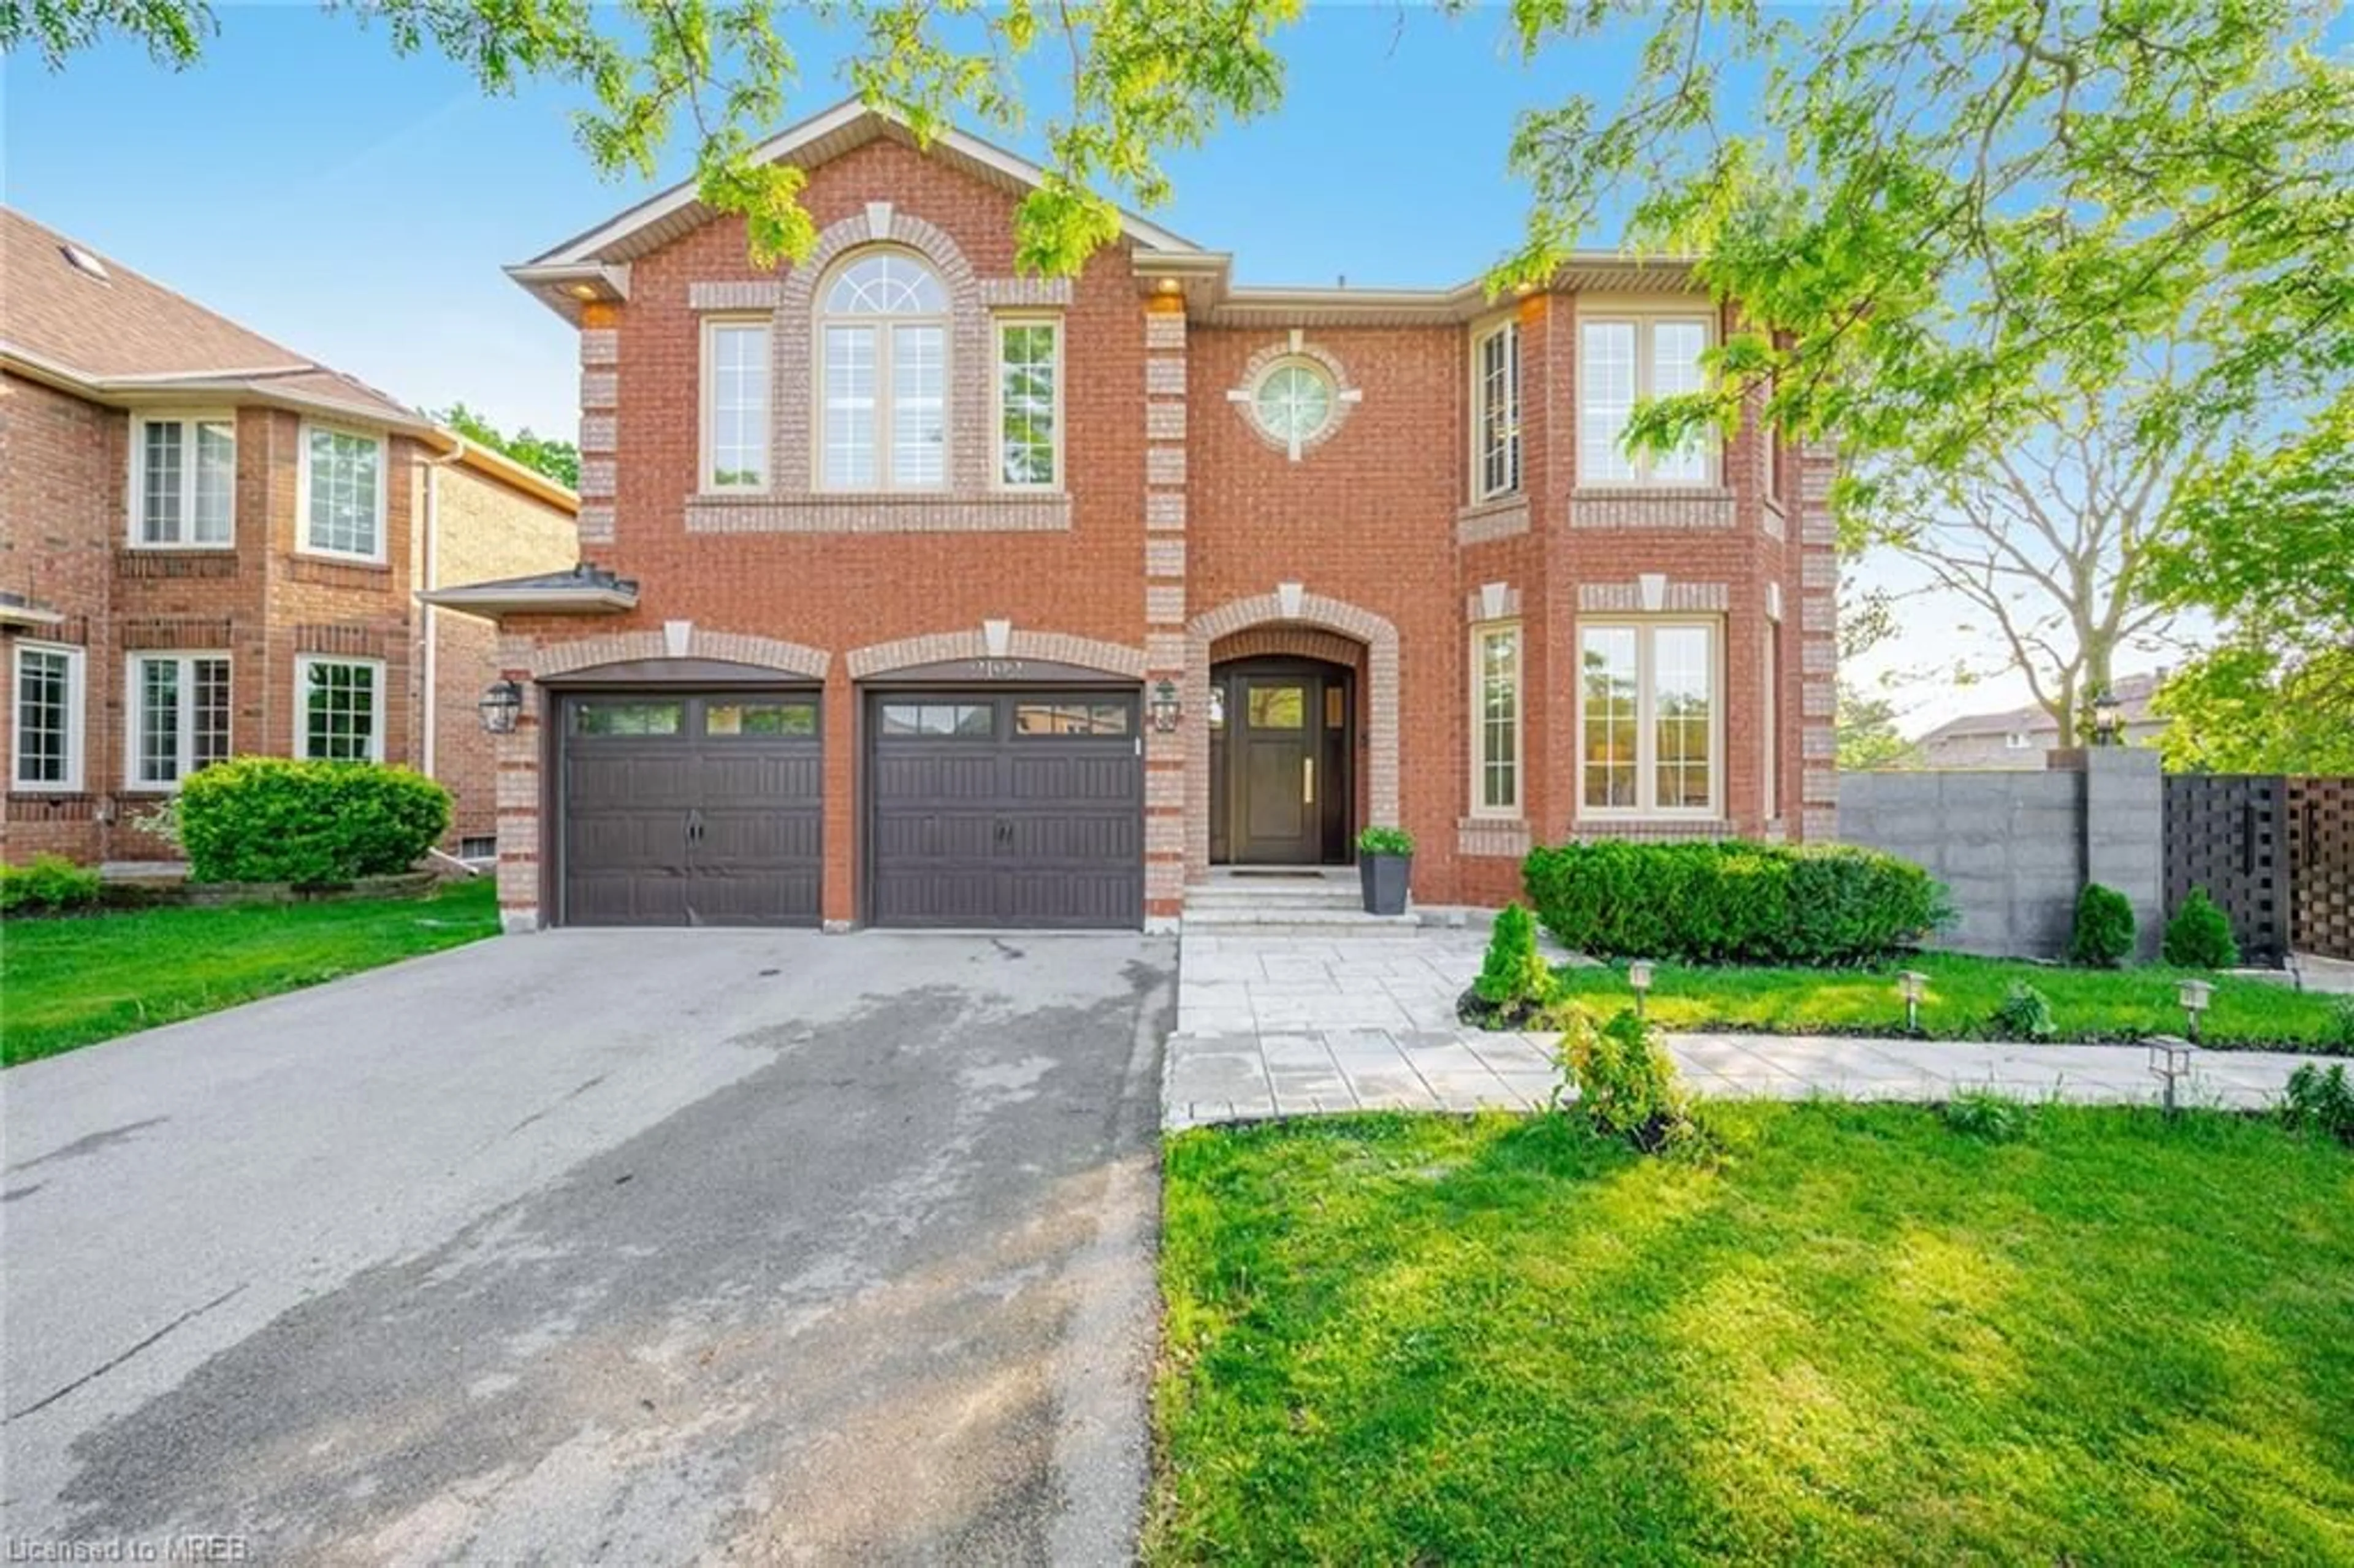 Home with brick exterior material for 2192 Oakmead Blvd, Oakville Ontario L6H 6B4